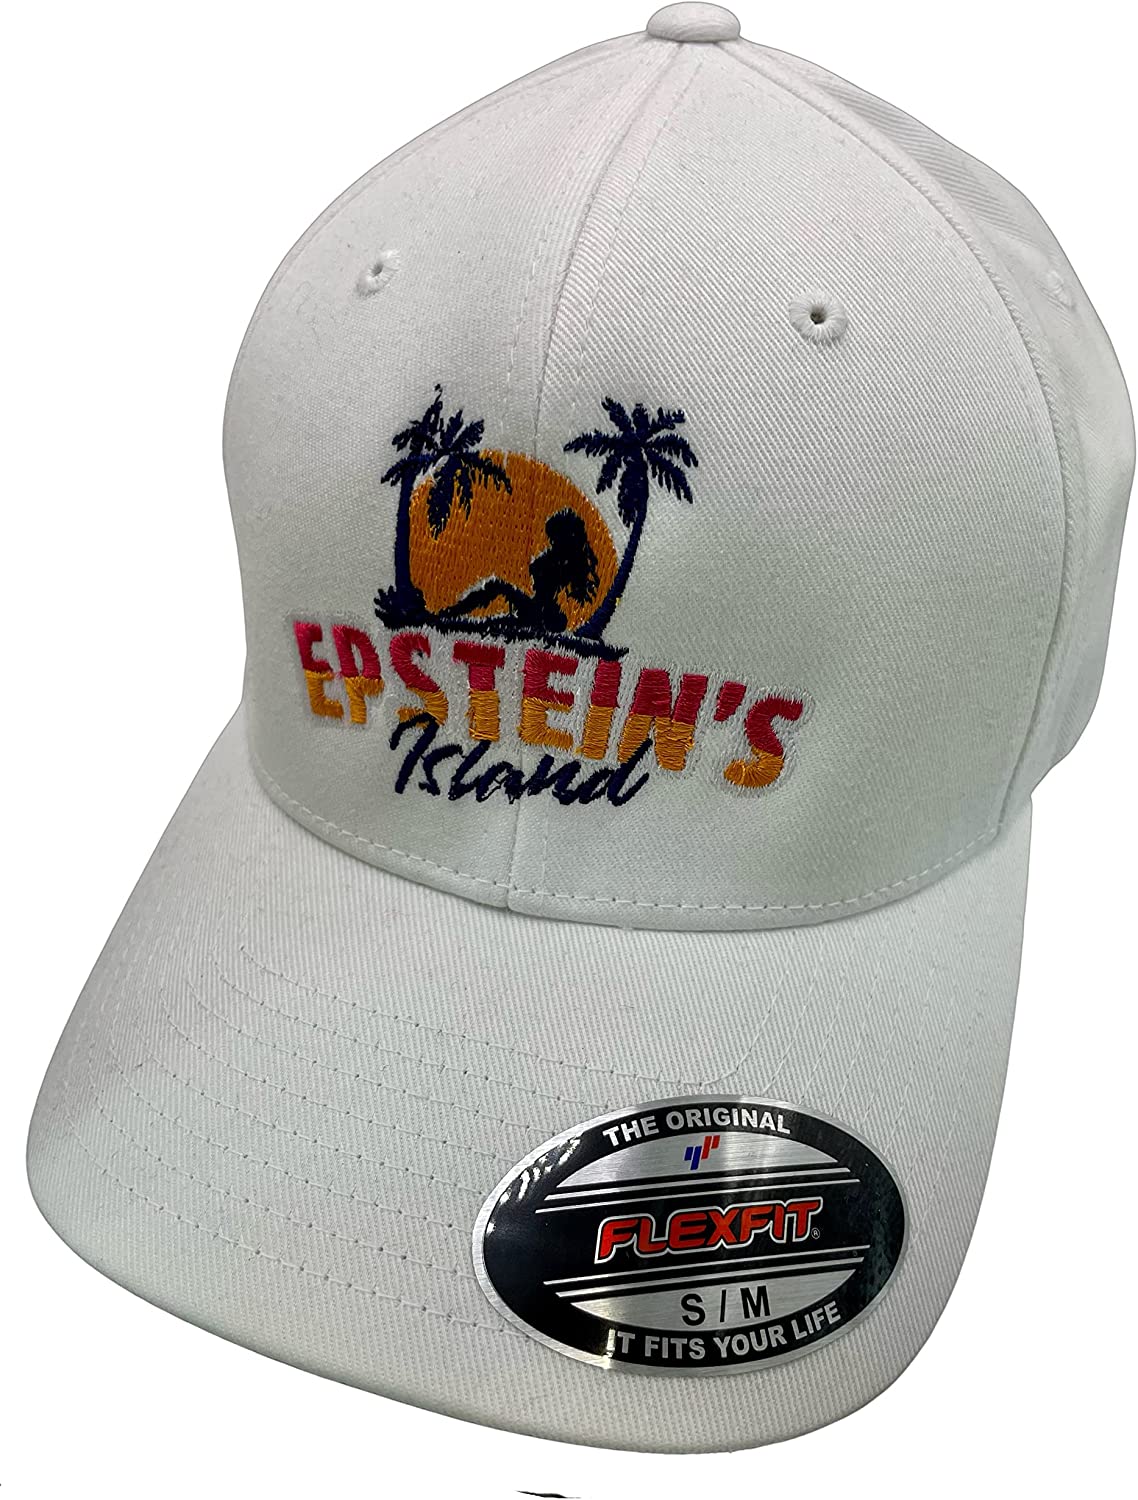 Epsteins Island – White, Flex Fit, Fitted Hat by Pats Hats